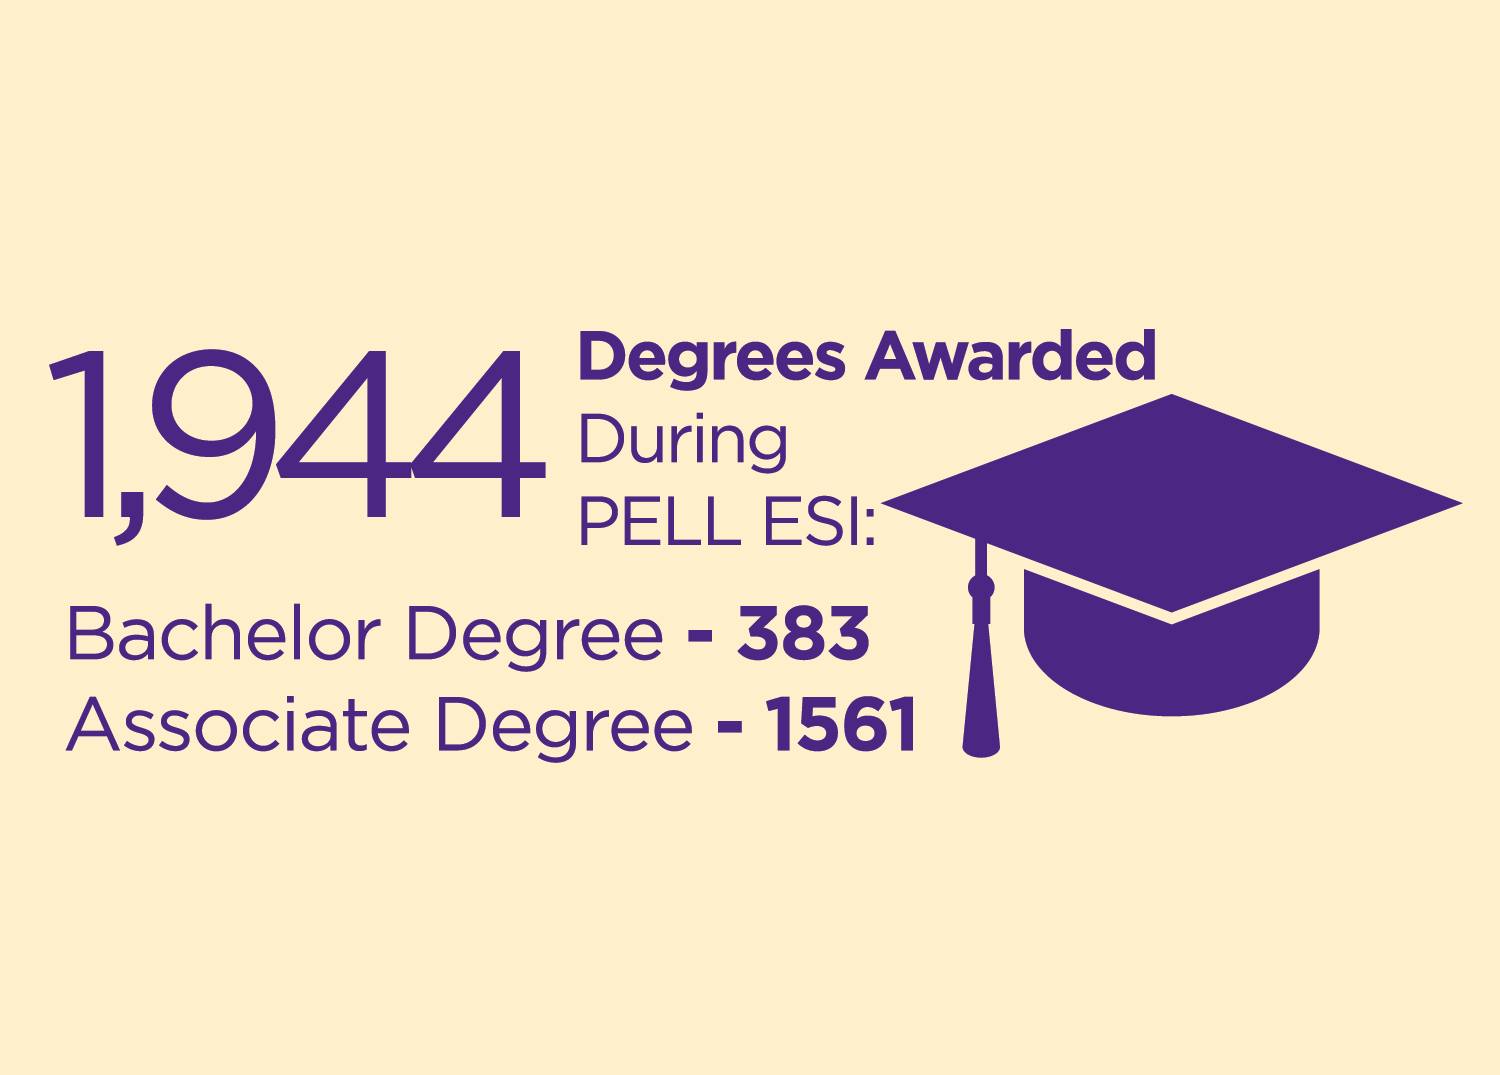 1,944 degrees awarded during PELL ESI (383 Bachlor and 1,561 Associate)